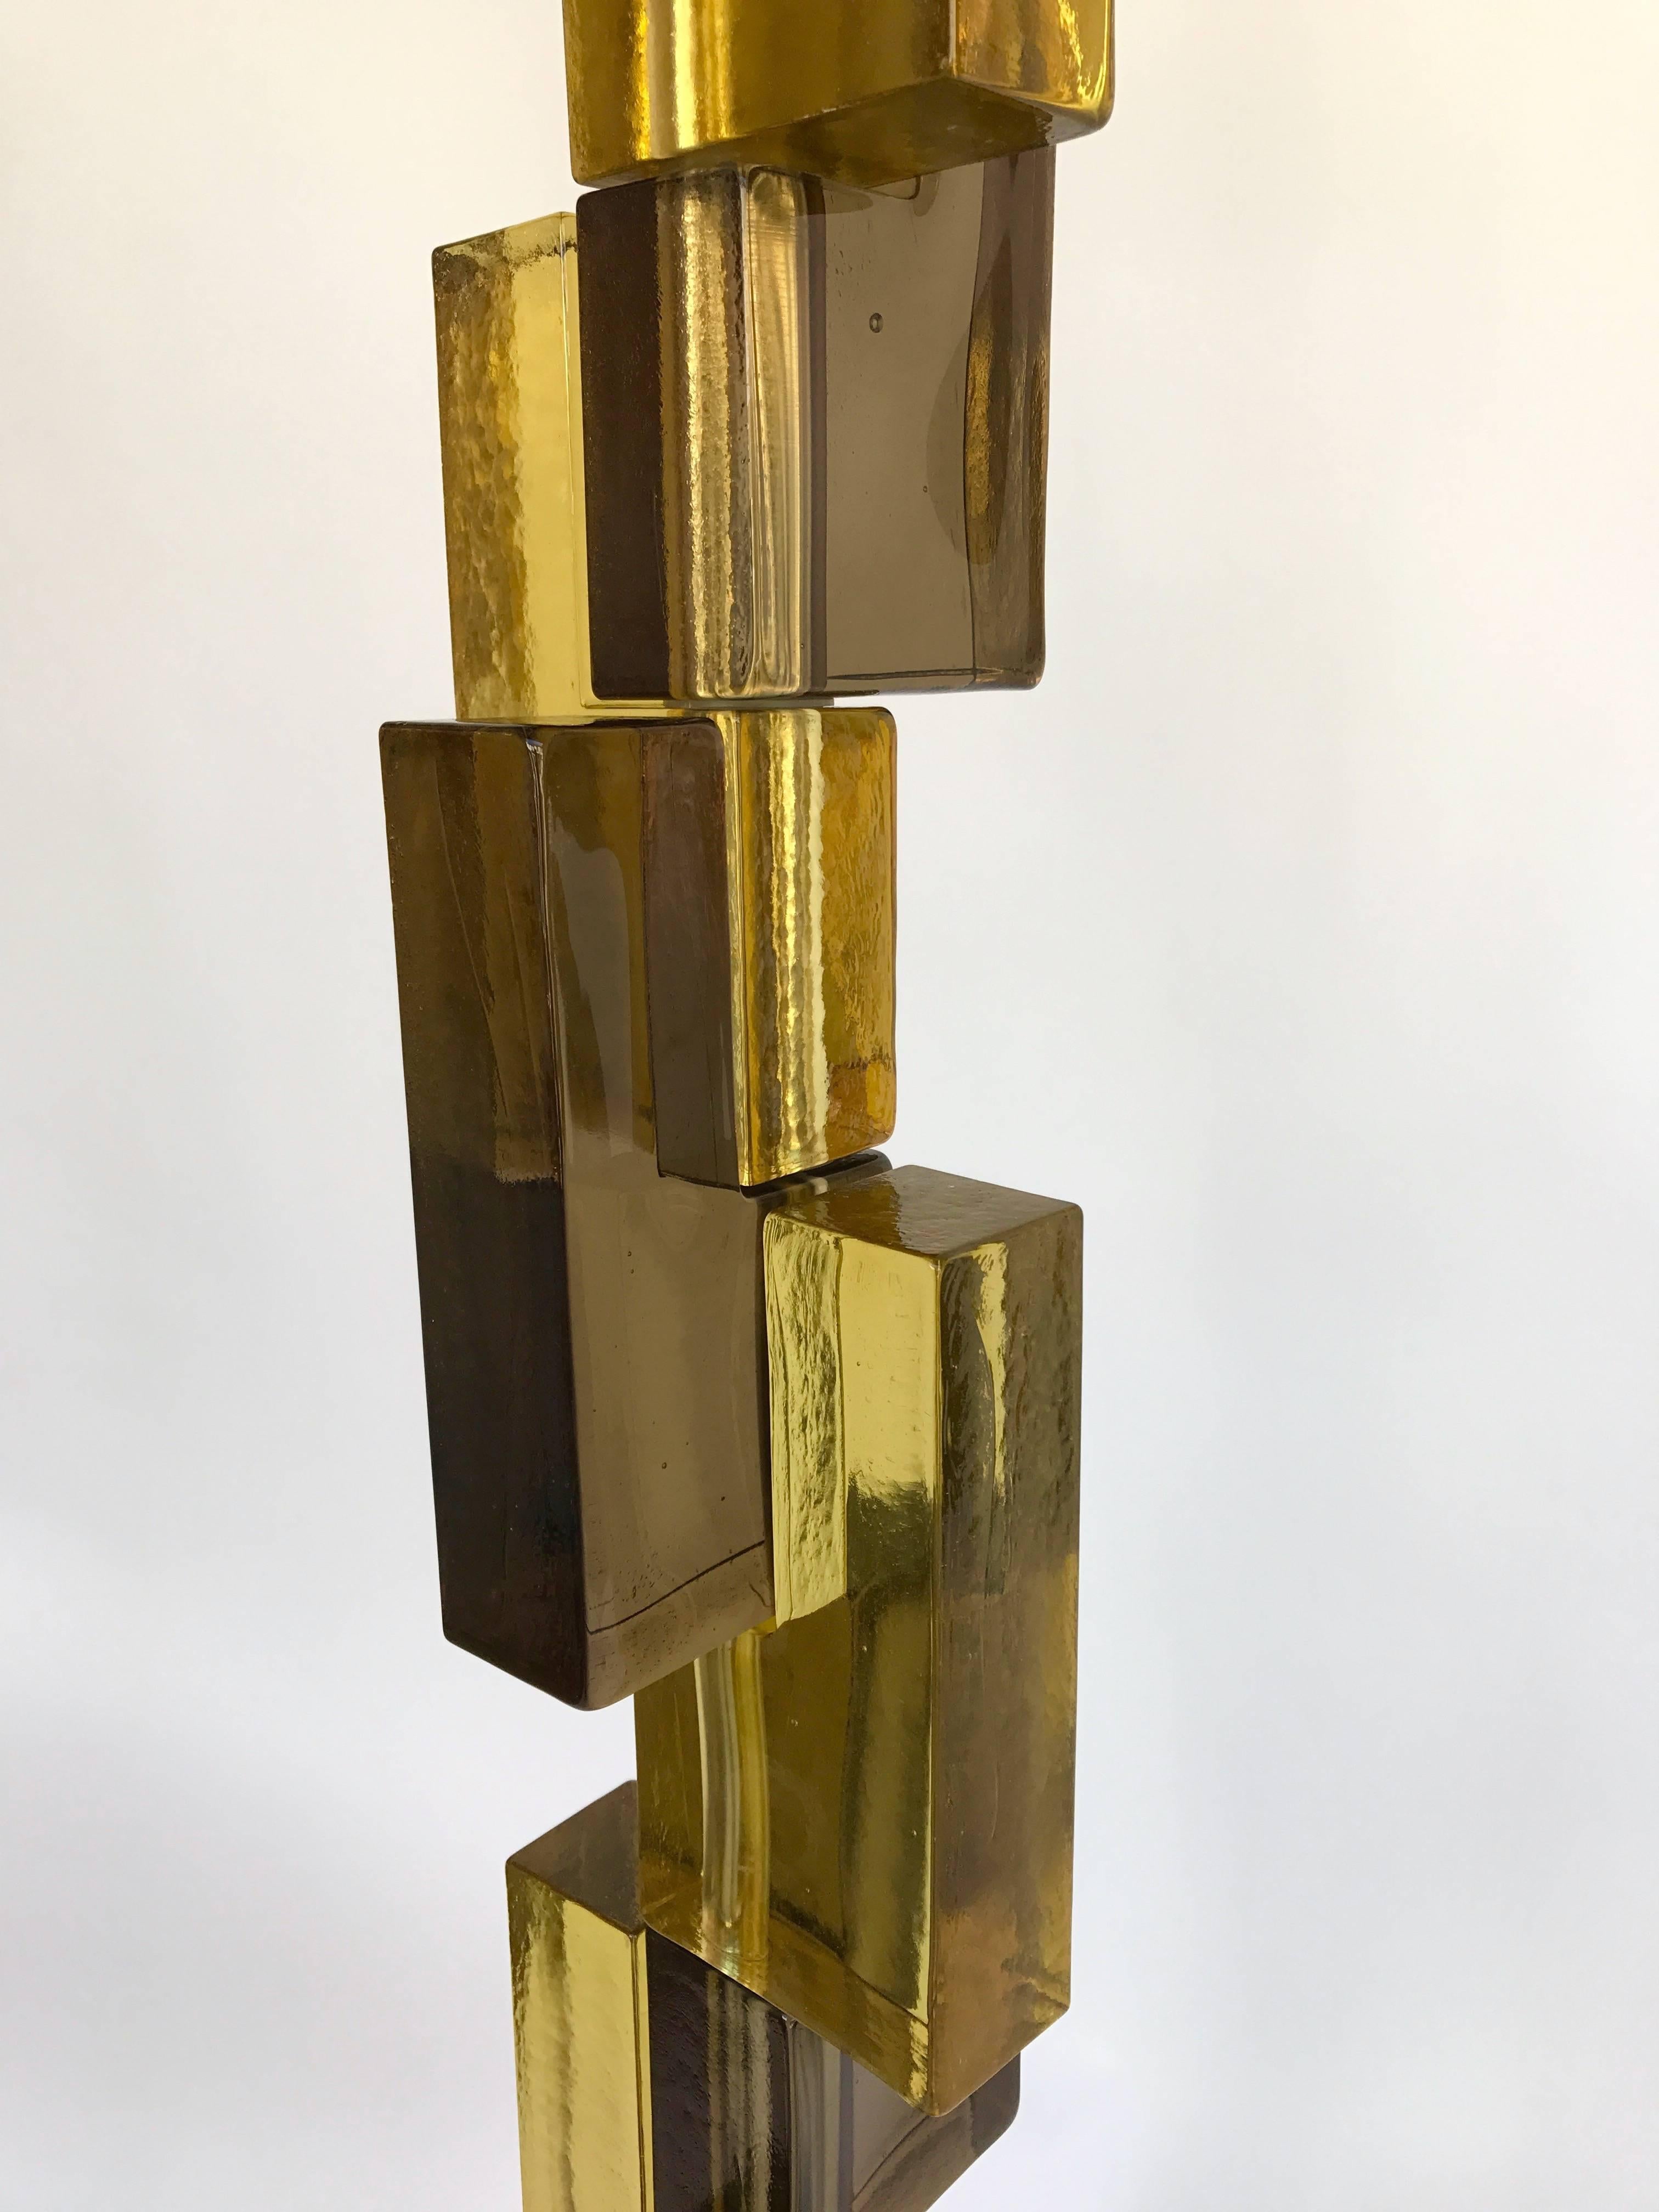 Huge contemporary cubic floor lamp in Murano pressed glass. Very quality glass block construction. Nice mix of smoke and yellow glass. In the style of Mazzega, Vistosi, Venini, Poliarte, Hollywood Regency.

NOTE: Brass shades on order, not included